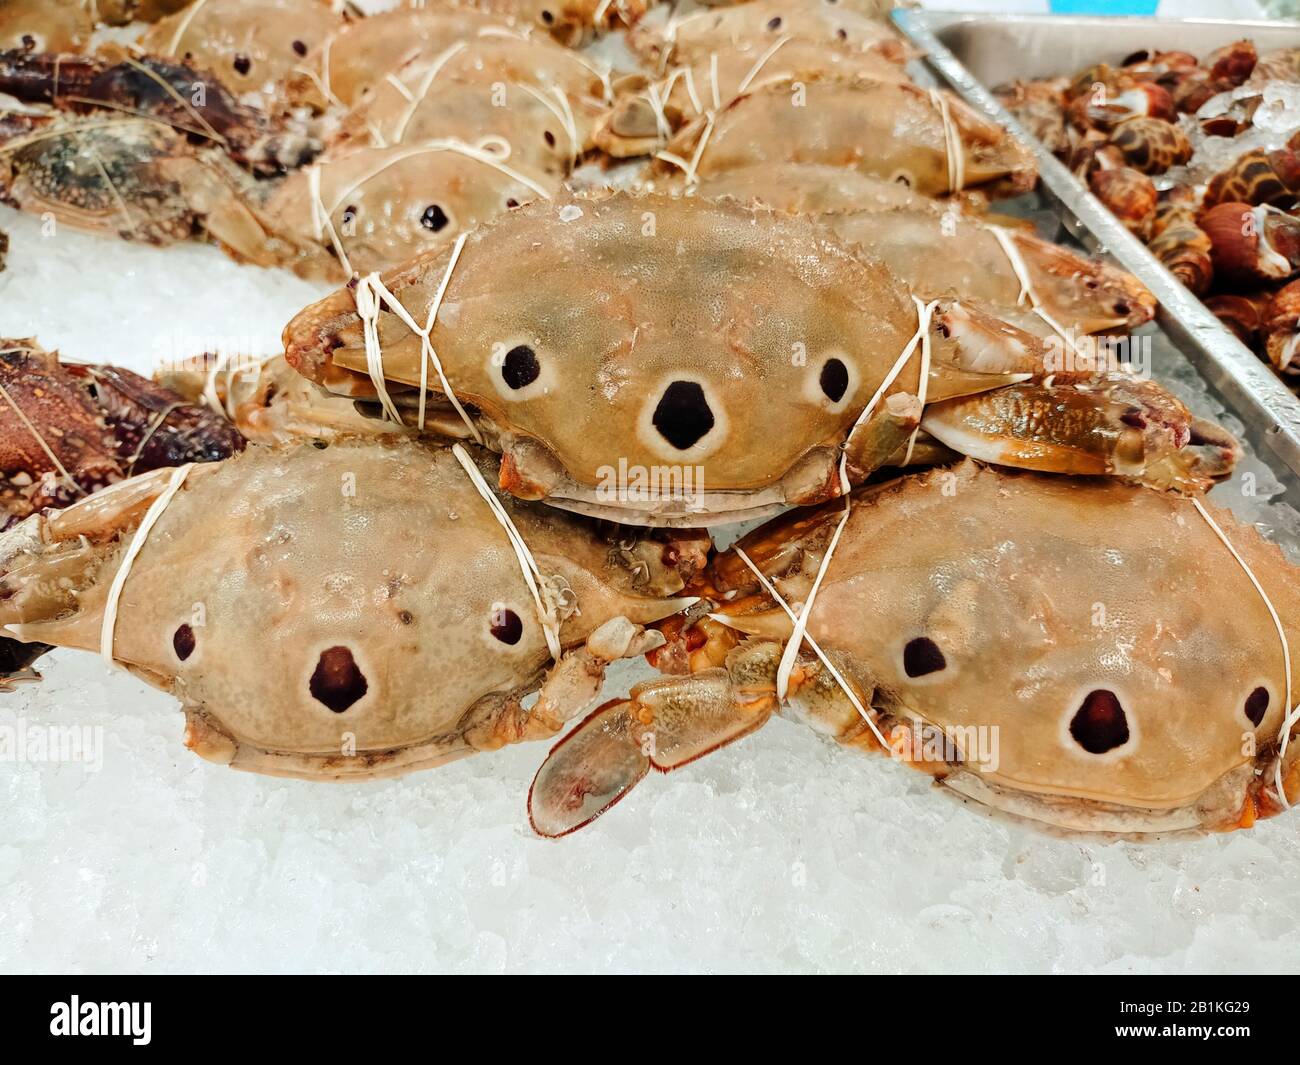 Fresh crabs on ice display in a supermarket. Stock Photo